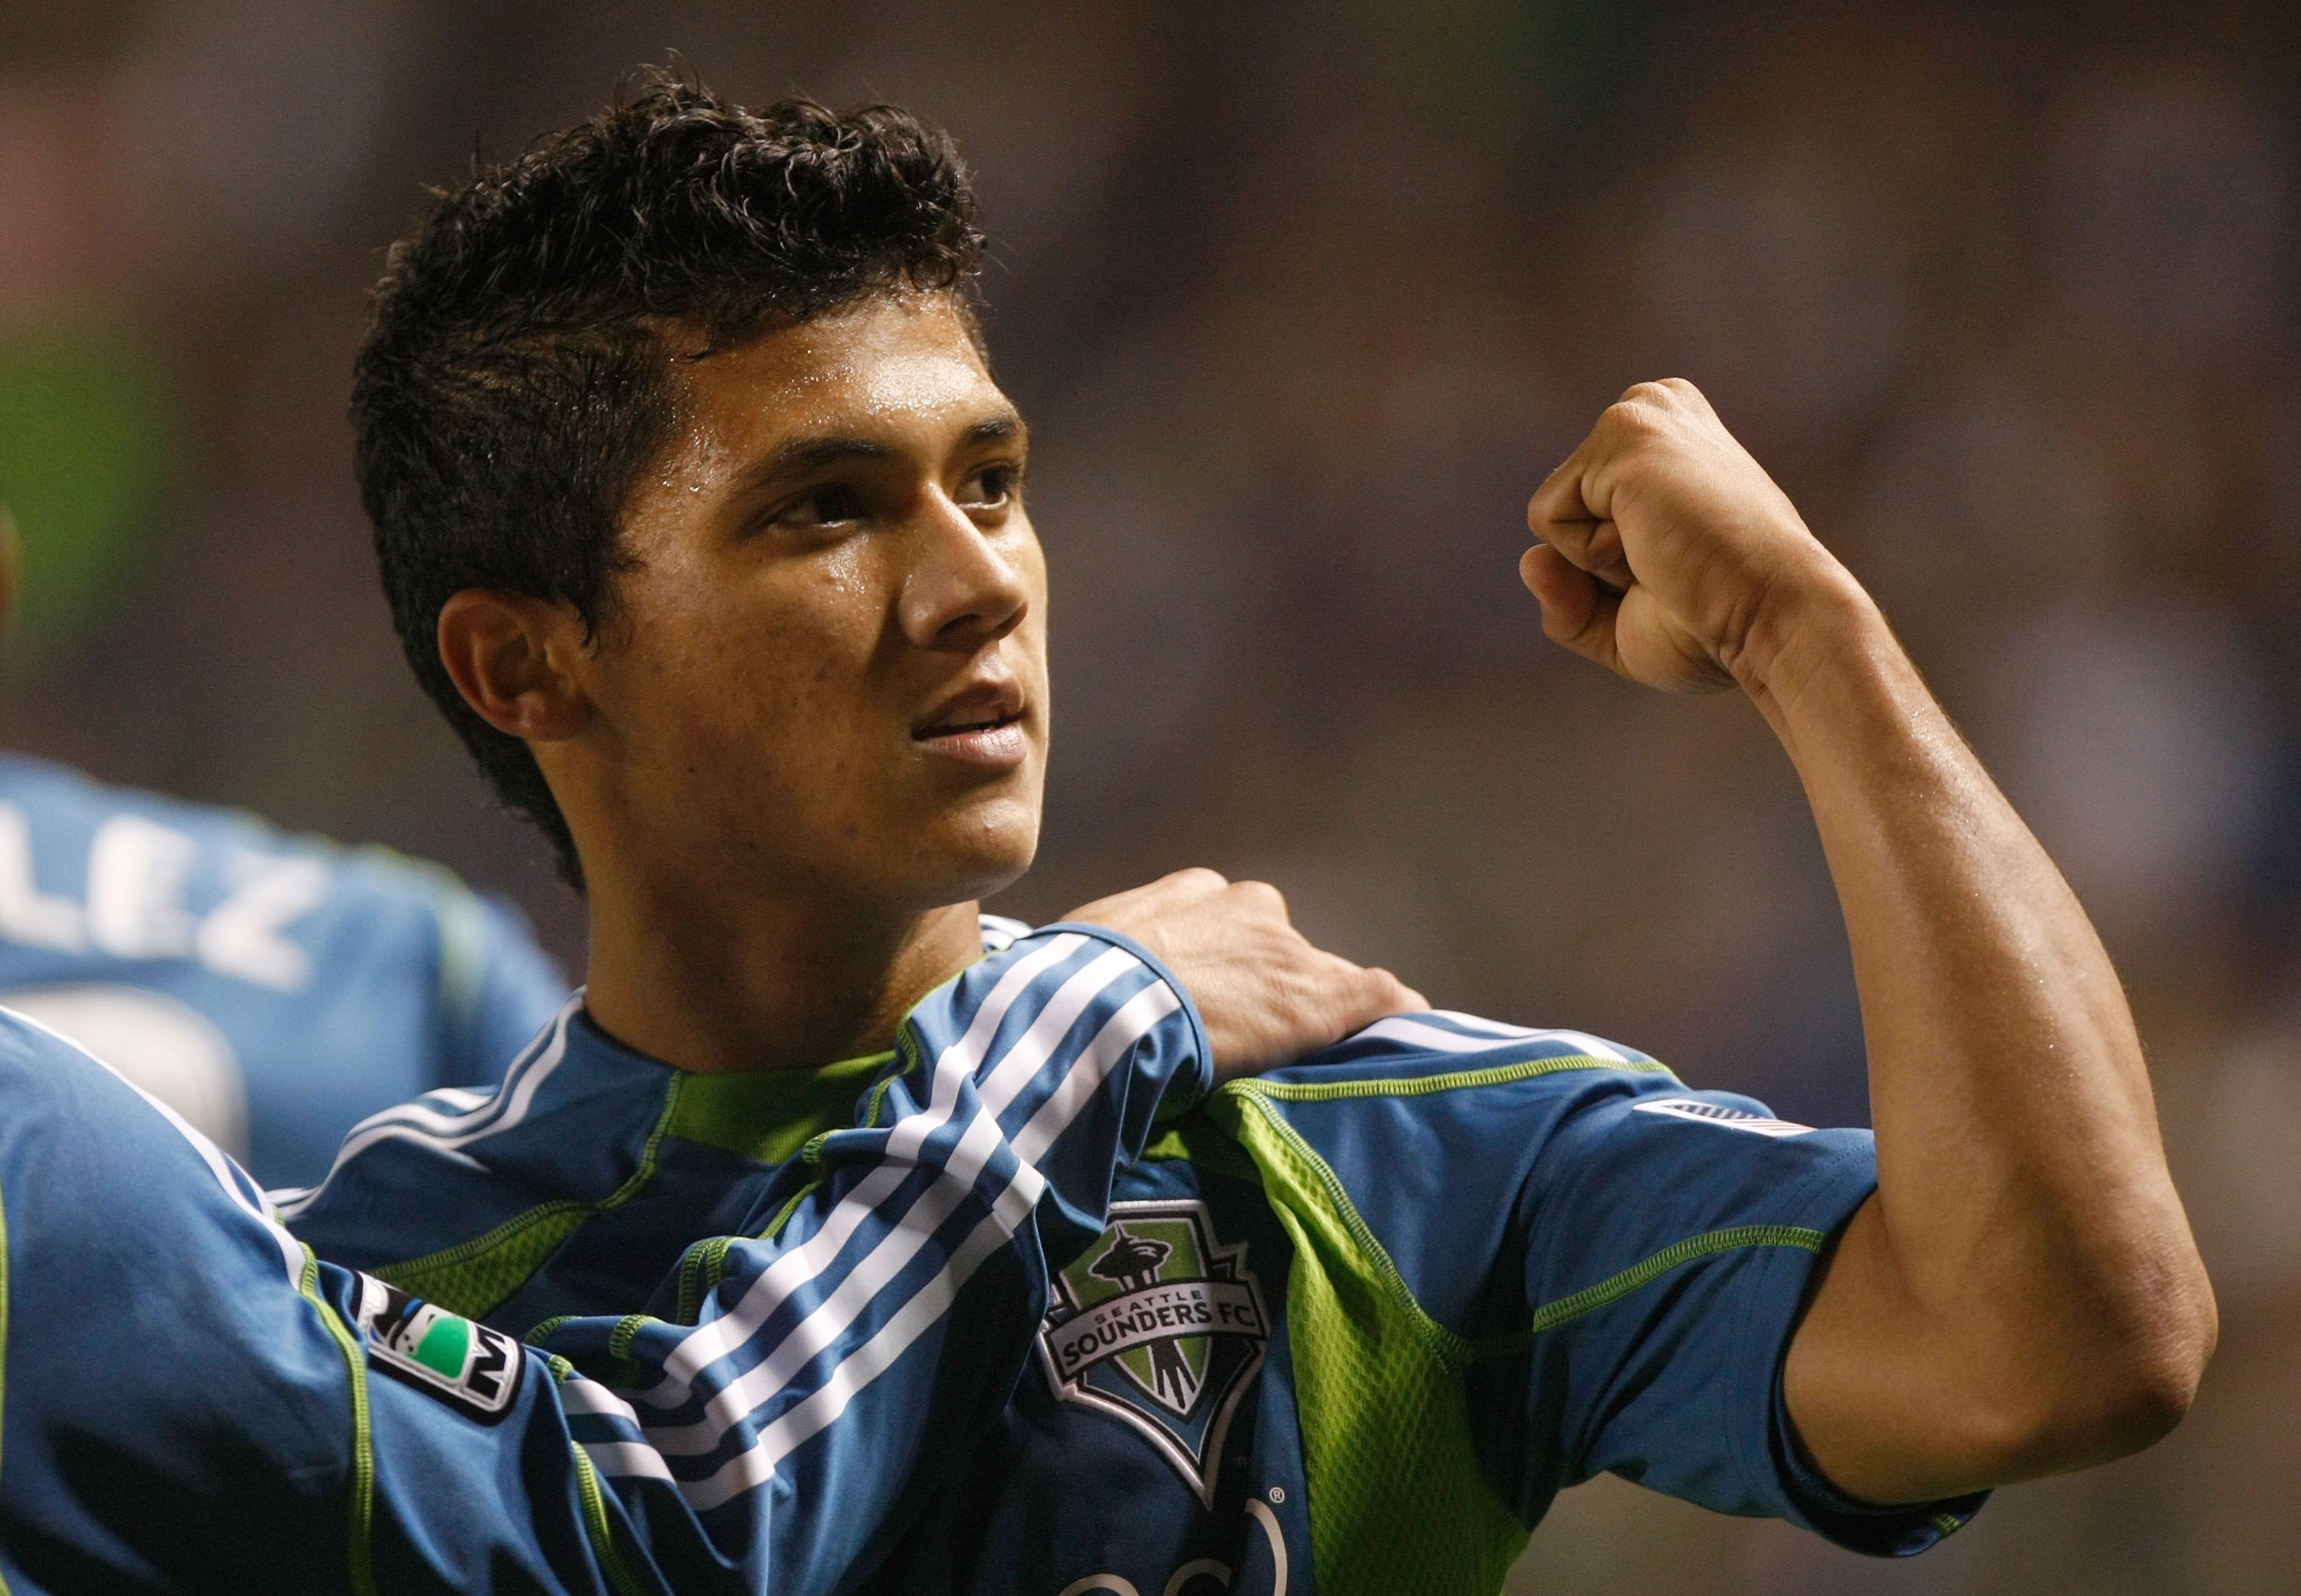 CARSON, CA - AUGUST 15:  Fredy Montero #17 of the Seattle Sounders FC celebrates a goal against the Los Angeles Galaxy at the Home Depot Center on August 15, 2009 in Carson, California. The Sounders FC defeated the Galaxy 2-0.  (Photo by Jeff Gross/Getty